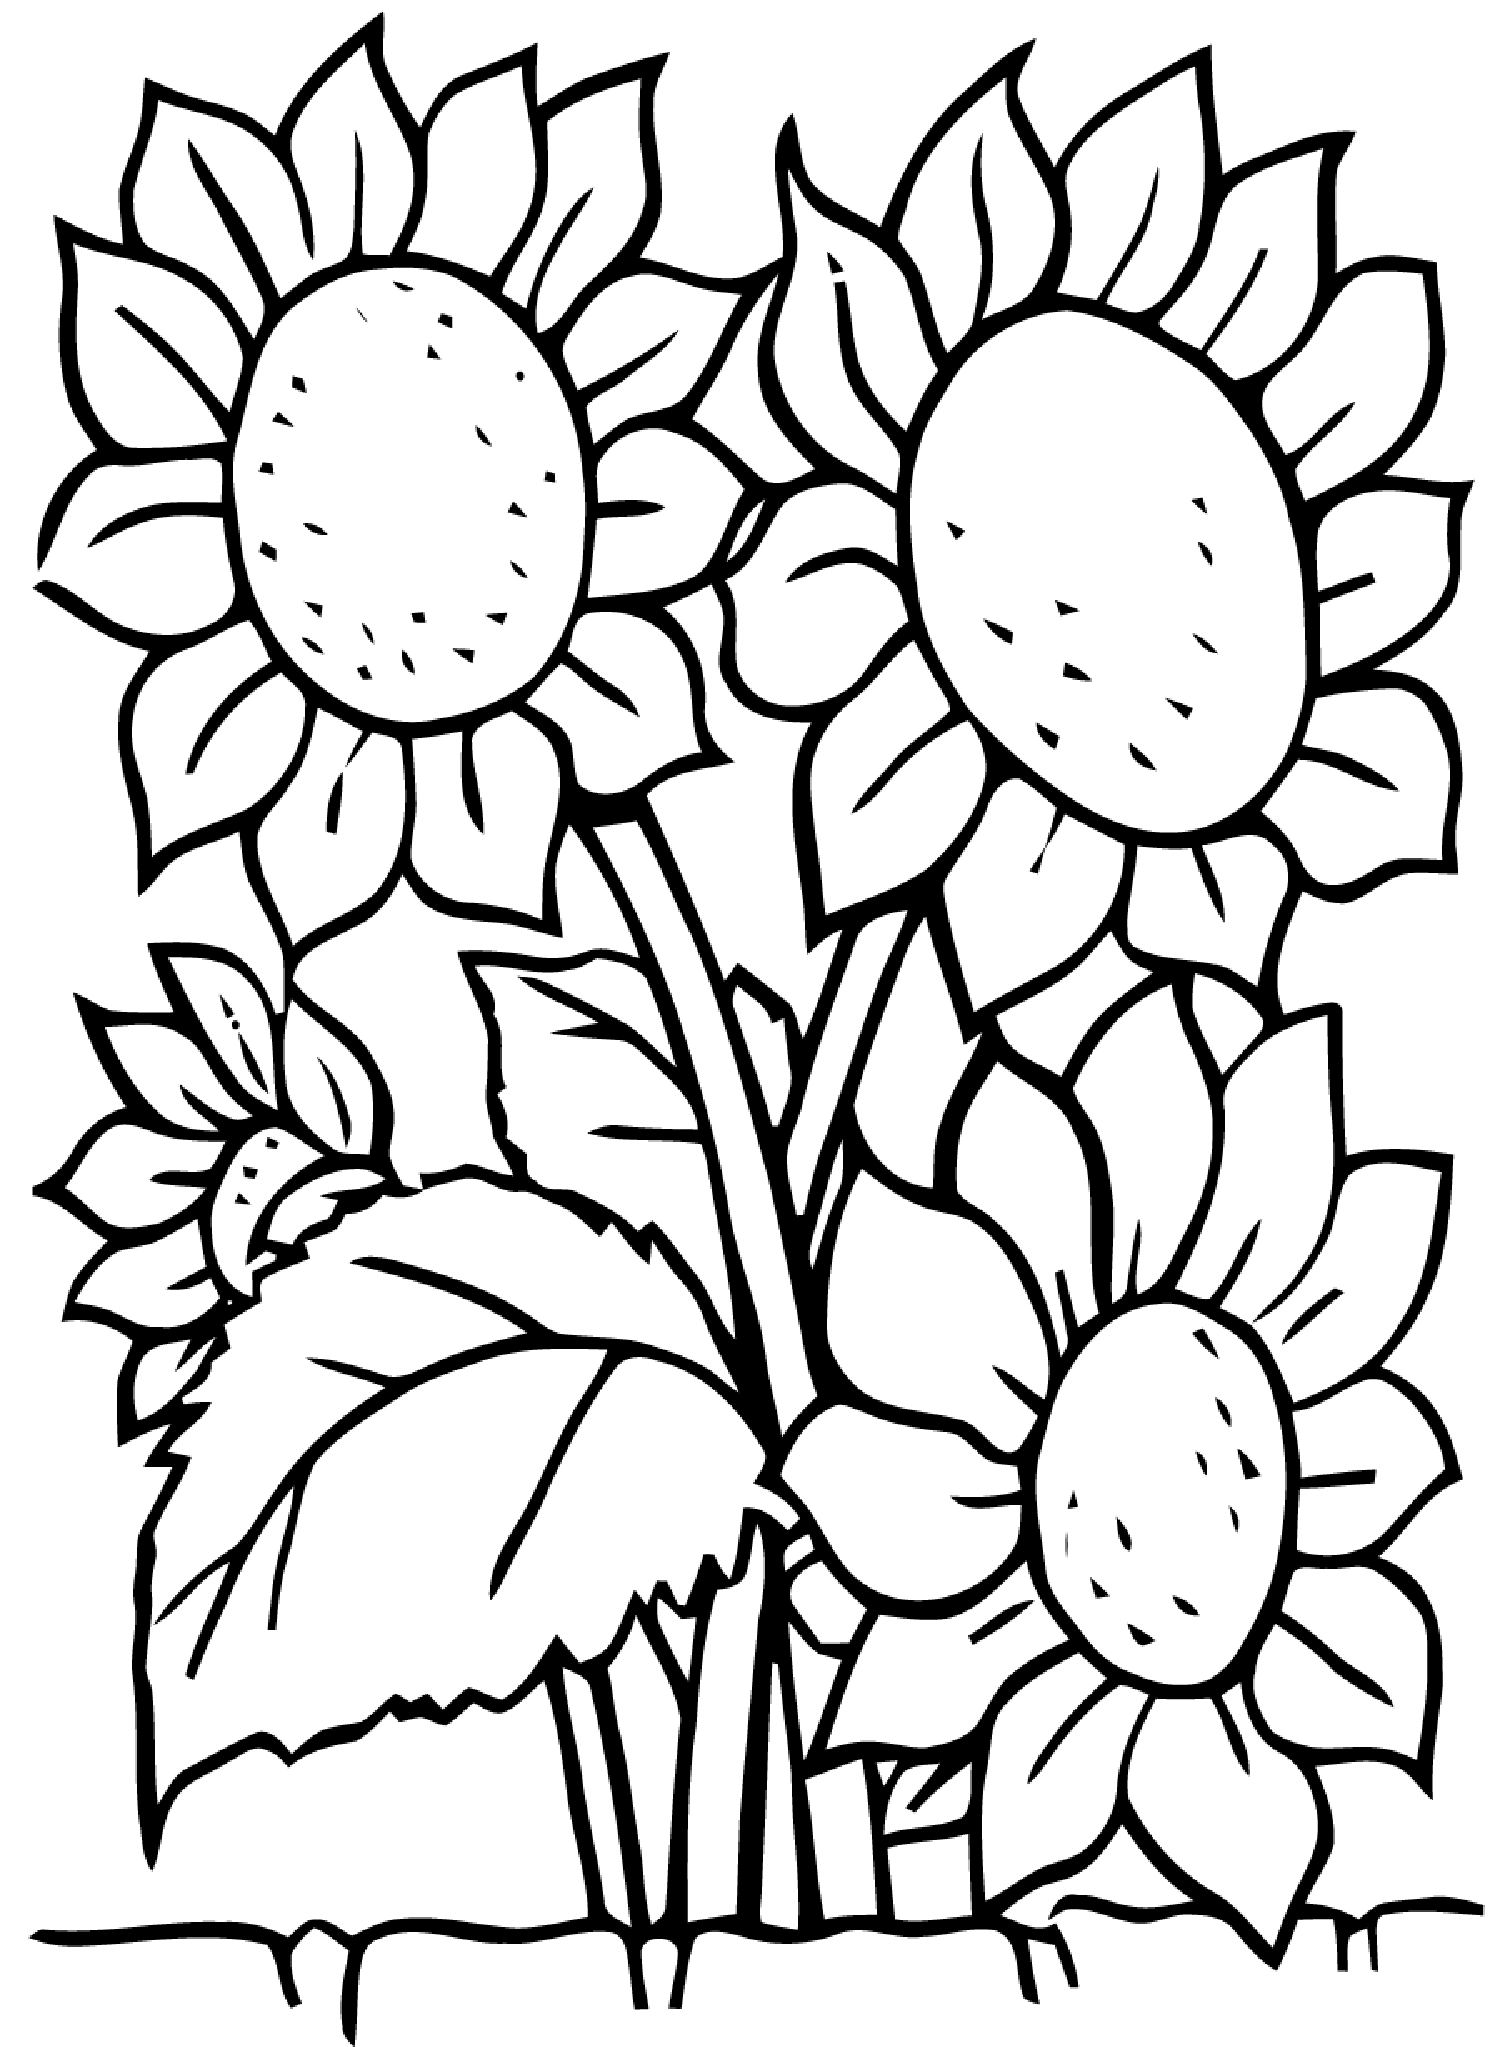 Flowers Coloring pages for kids to print & color : coloring-sunflowers